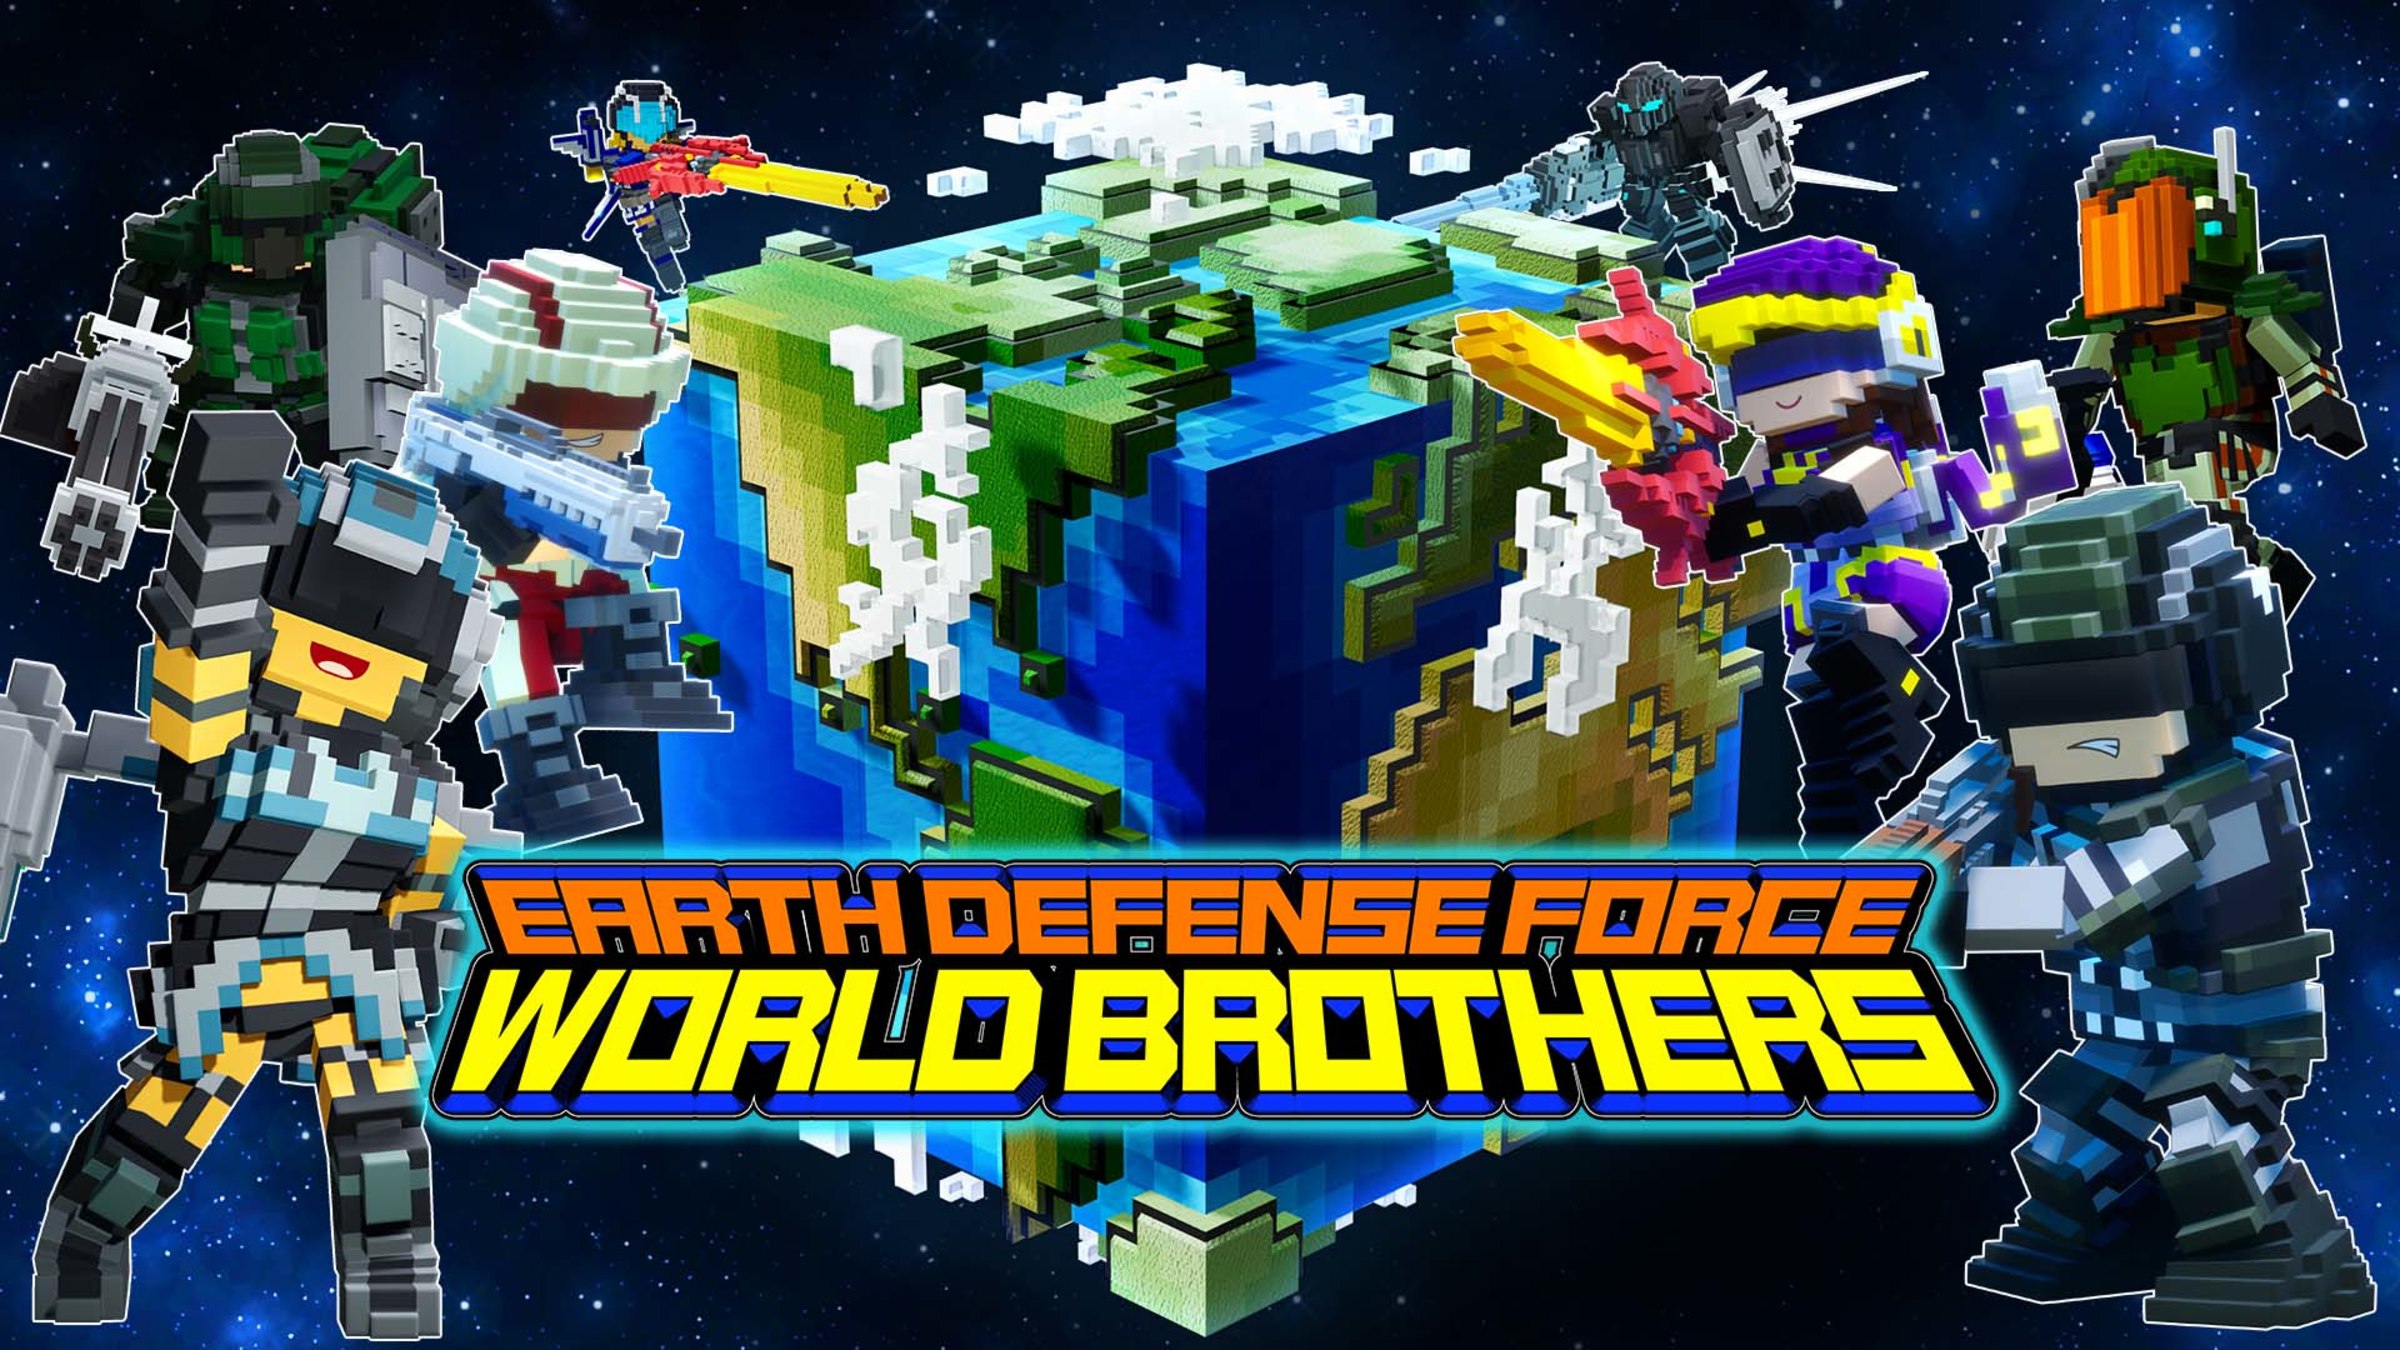 EARTH DEFENSE FORCE: WORLD BROTHERS - Nintendo Official Site